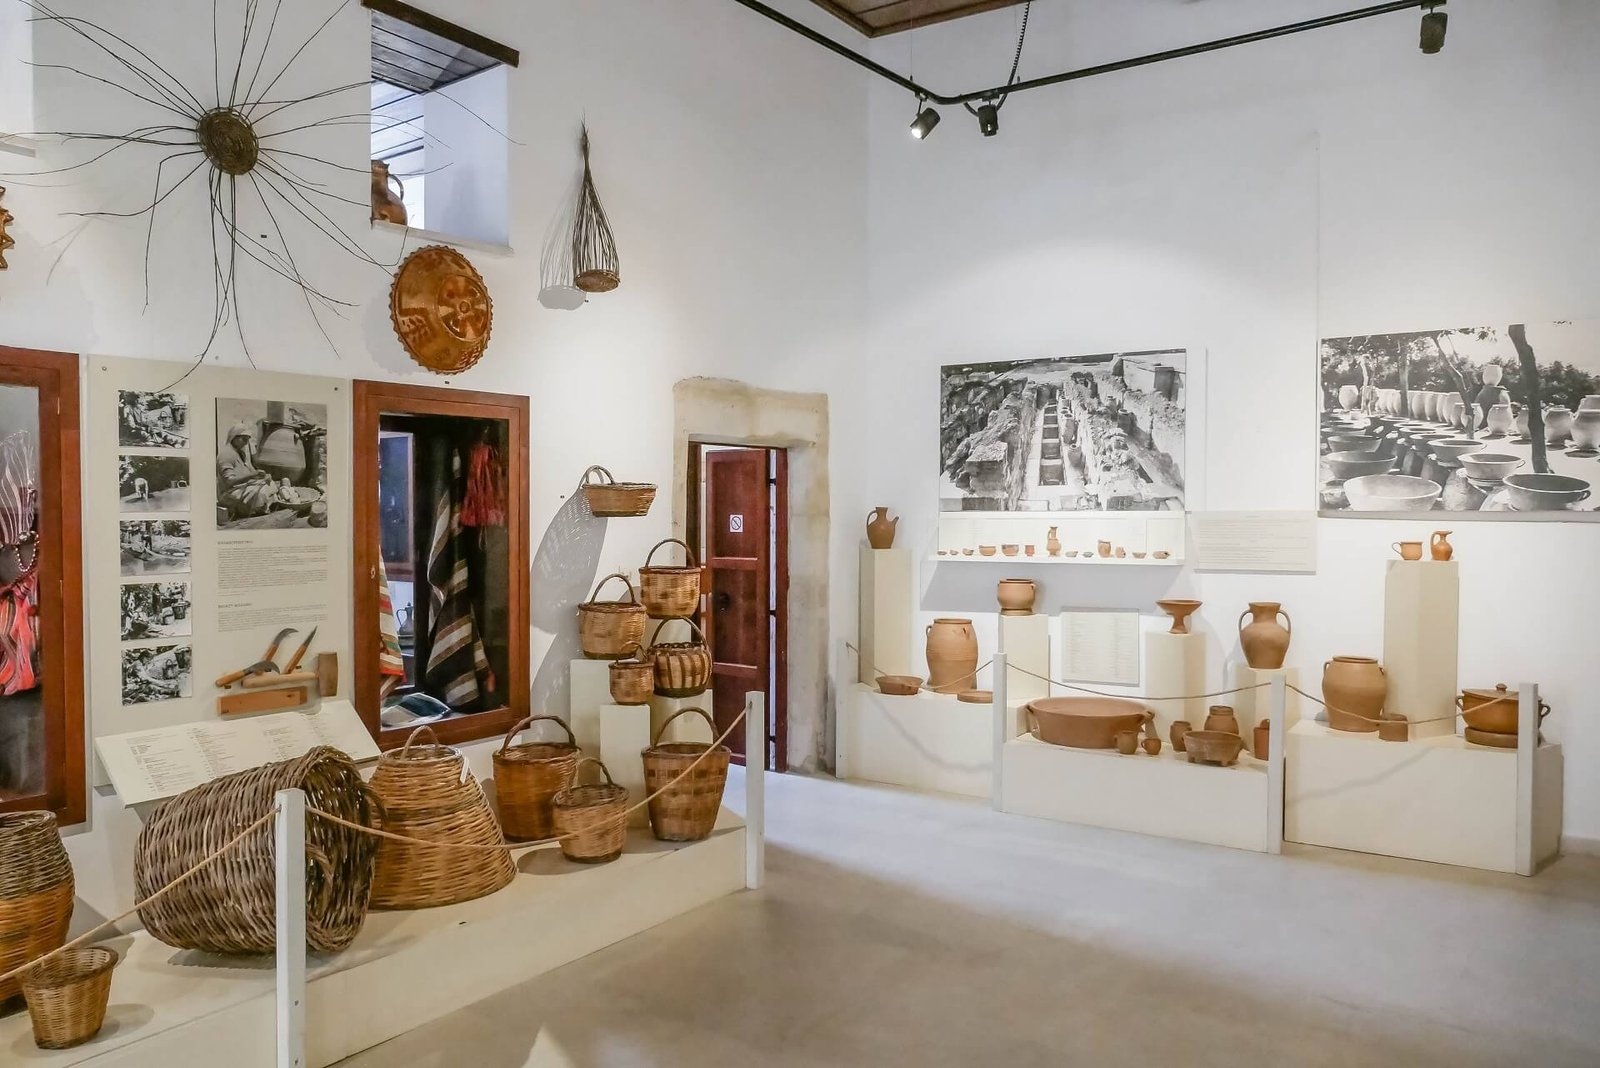 Historical and Folk Art Museum of Rethymno | AllinCrete Travel Guide for  Crete